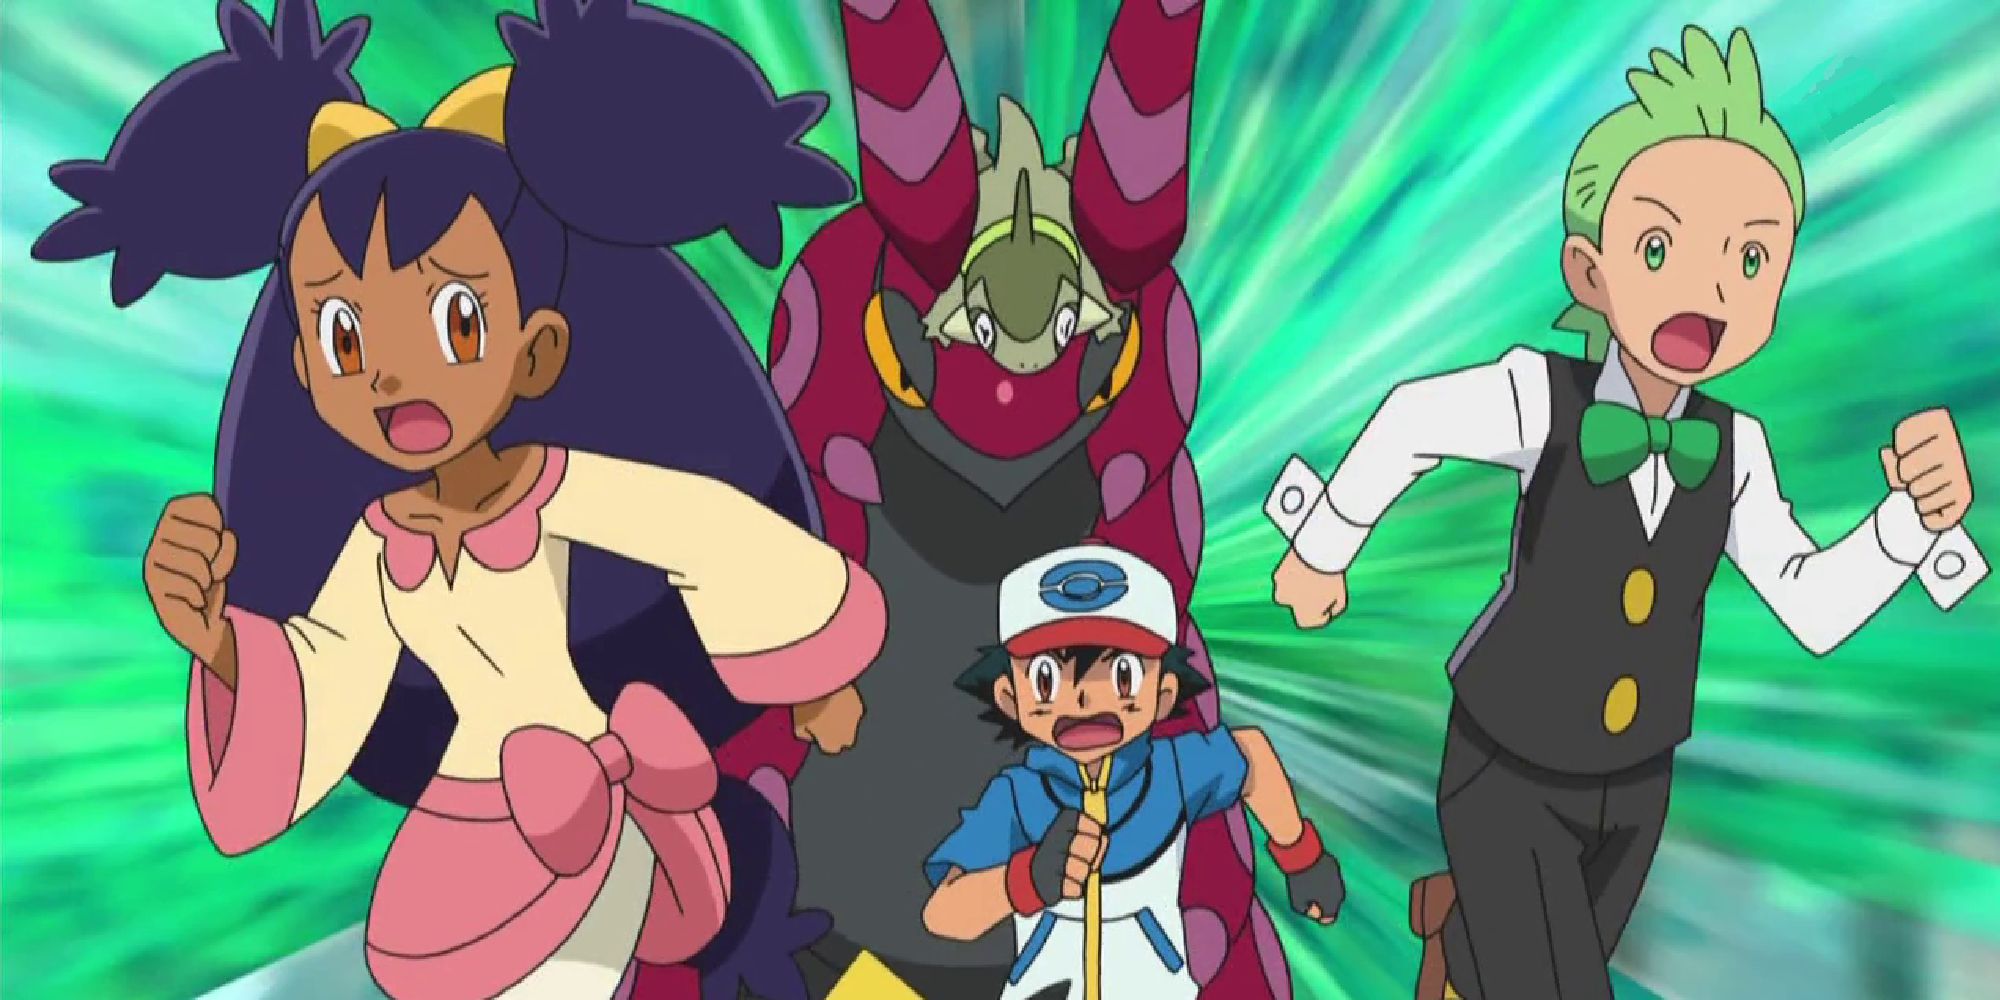 Iris, Ash, Pikachu, and Cilan running from a Scolipede that Axew is riding